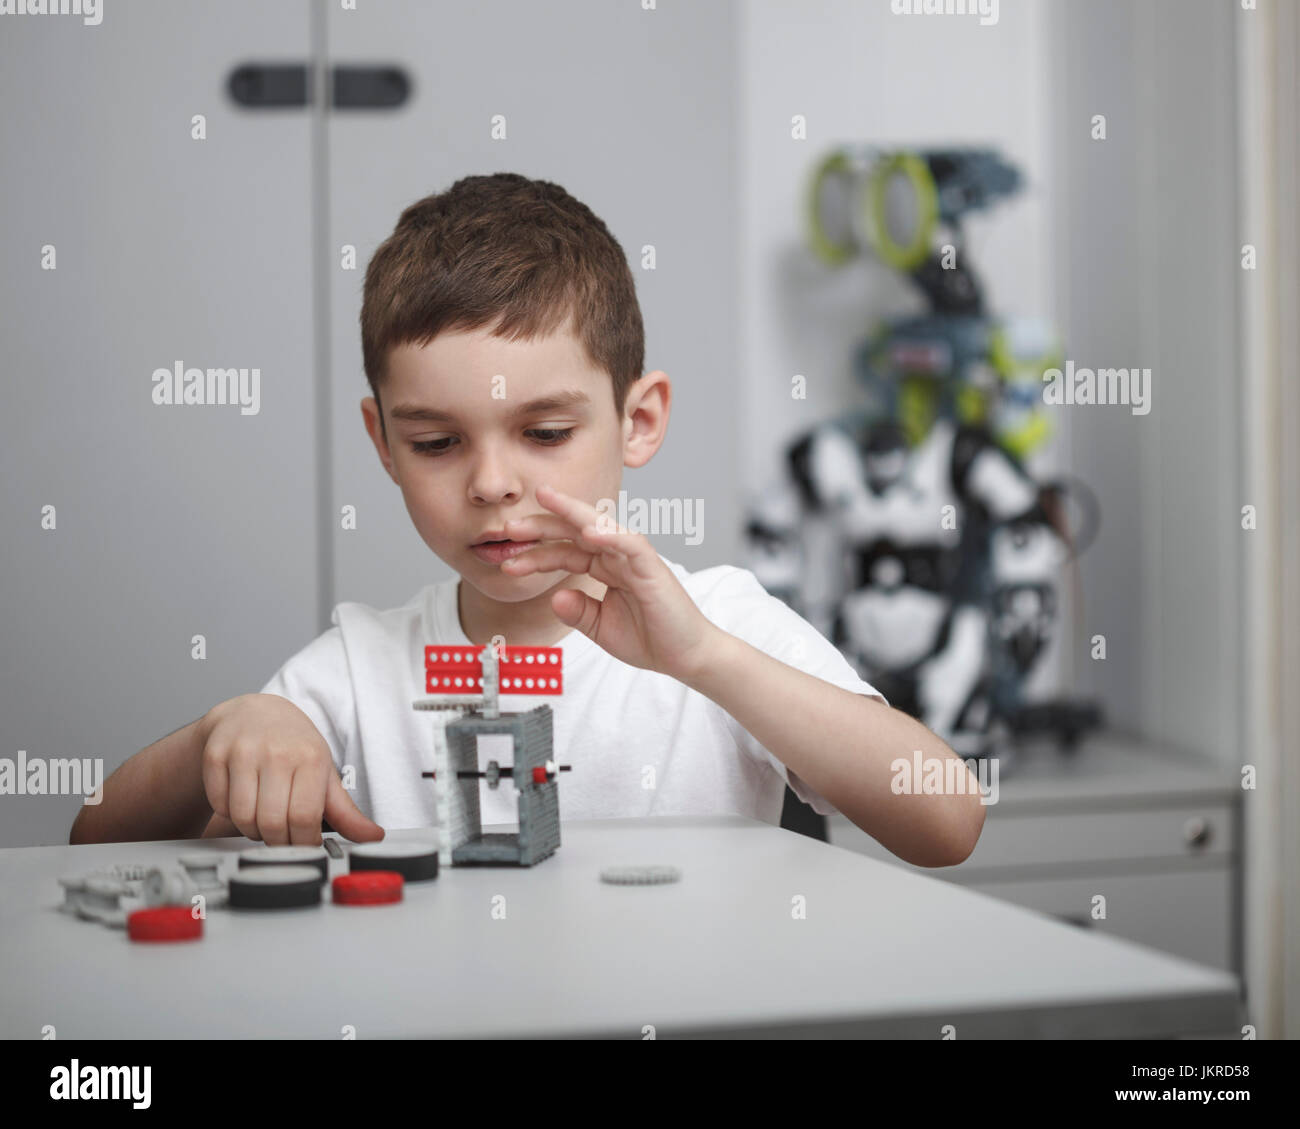 Cute boy operating machinery at table in classroom Stock Photo